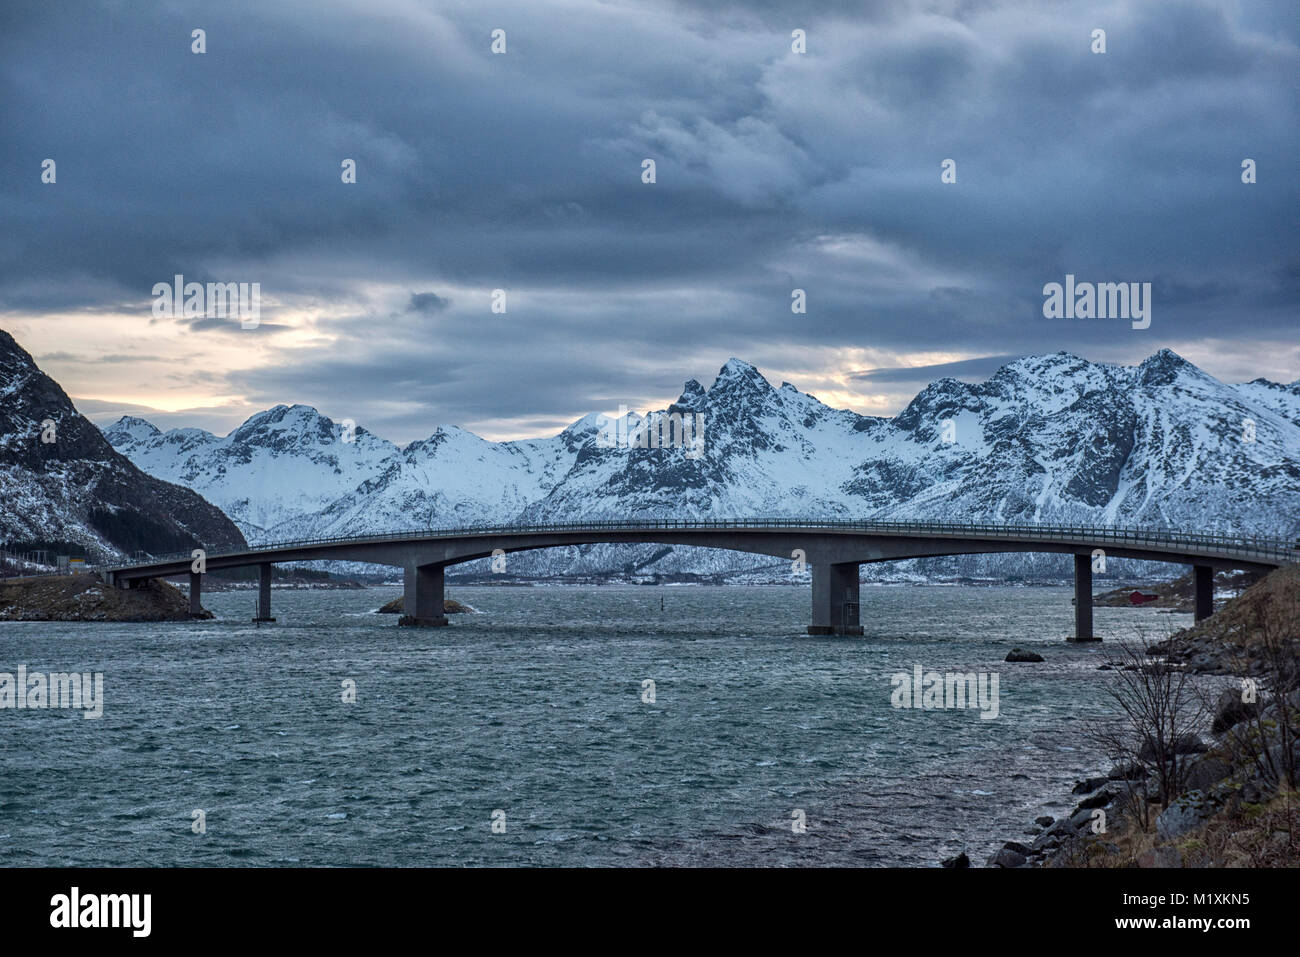 Bridge over a snow covered landscape in the Lofoten Islands of Norway Stock Photo